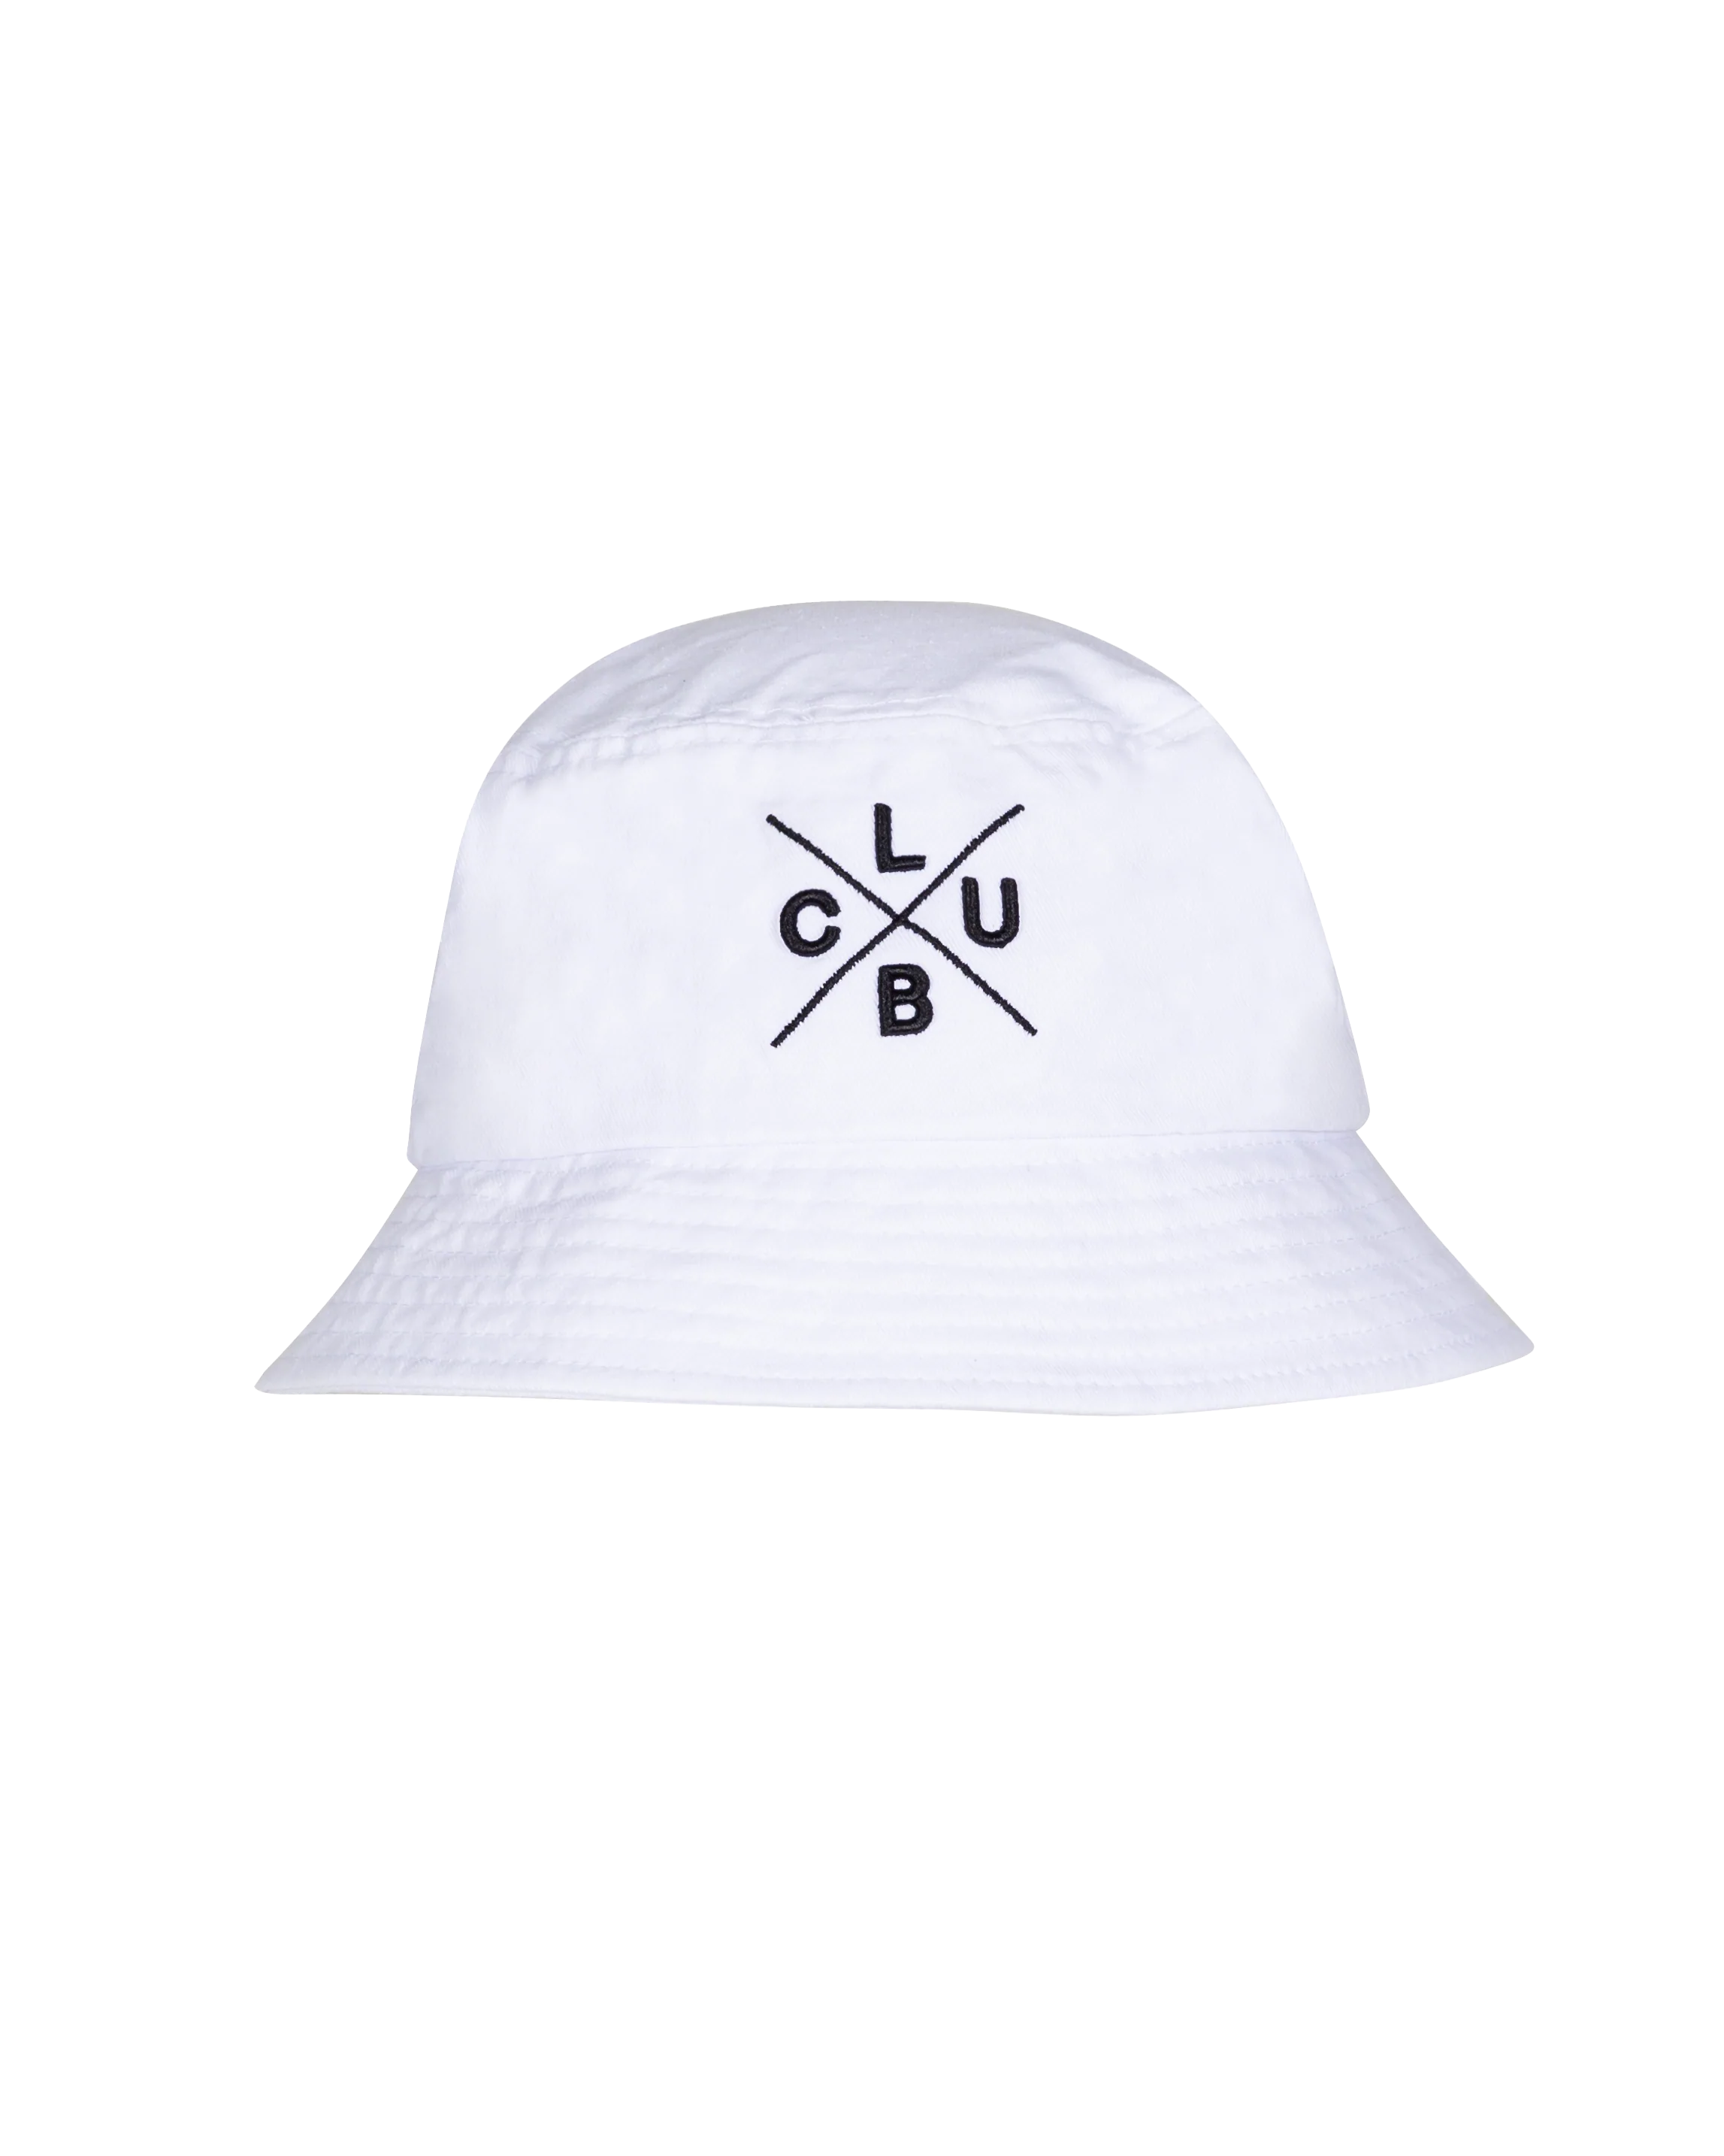 L'COUTURE White / One Size Club LC Bucket Hat White